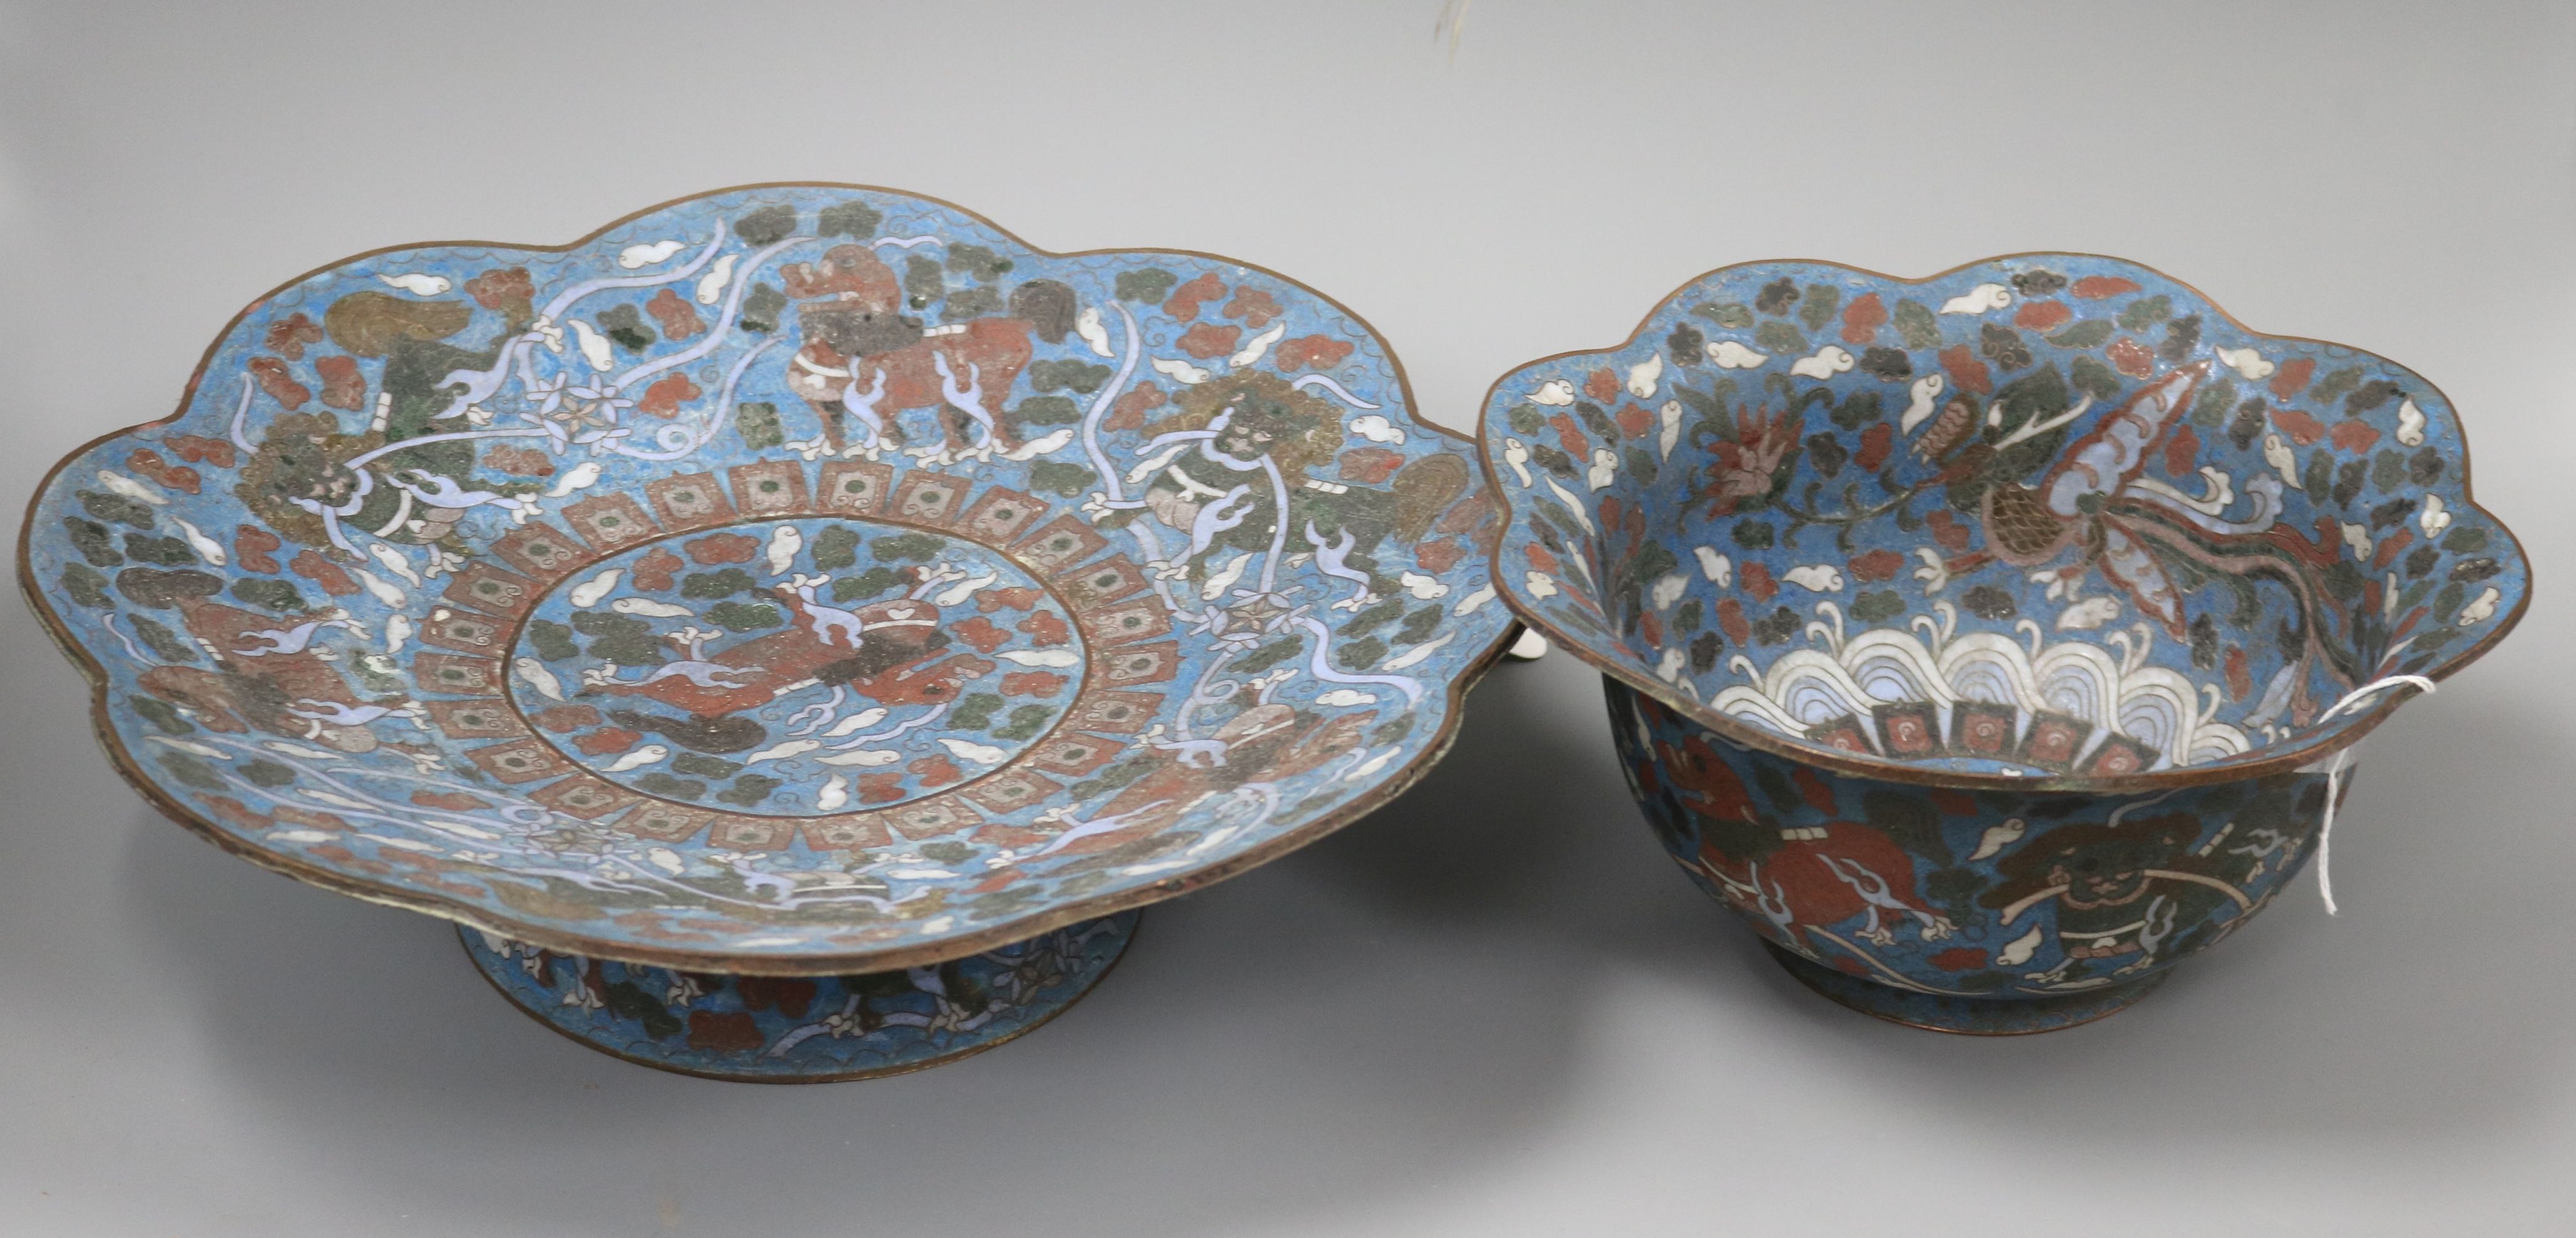 A Chinese blue ground cloisonne bowl with 'petal' rim and a similar footed bowl, the smaller deep